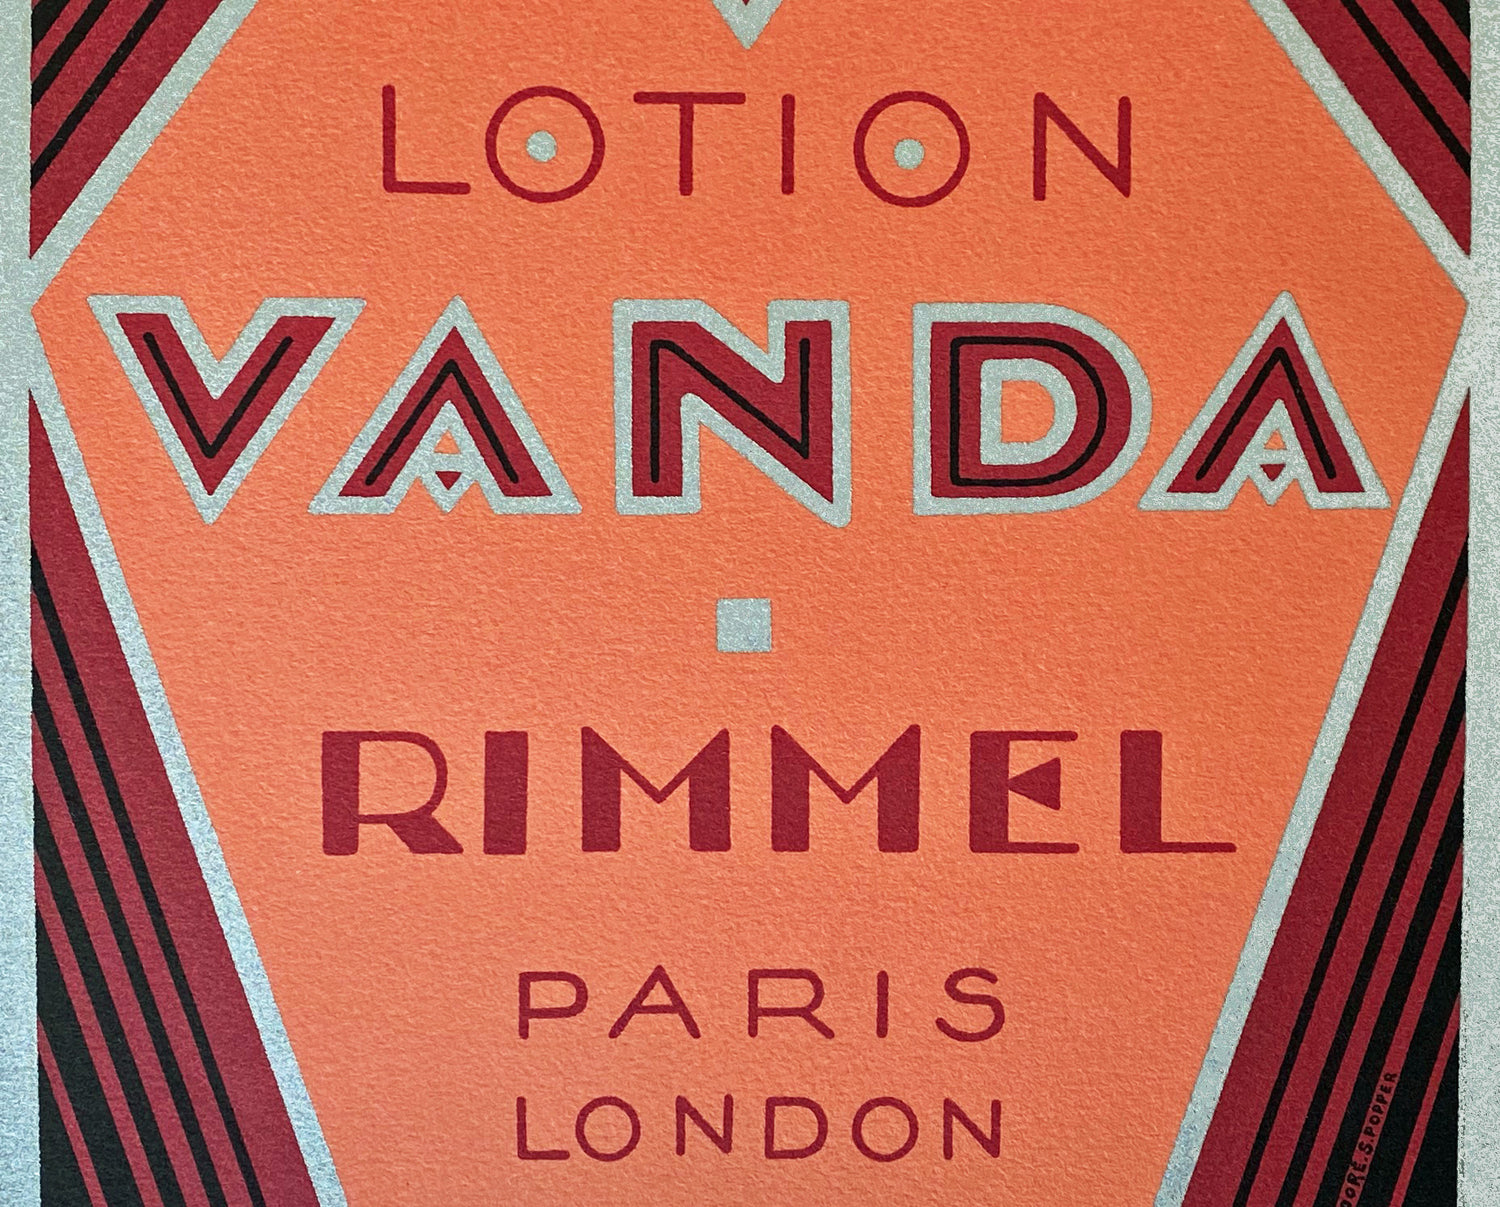 Rimmel Lotion Vanda RE Society Hand Pulled Lithograph Print Hand Signed and Numbered